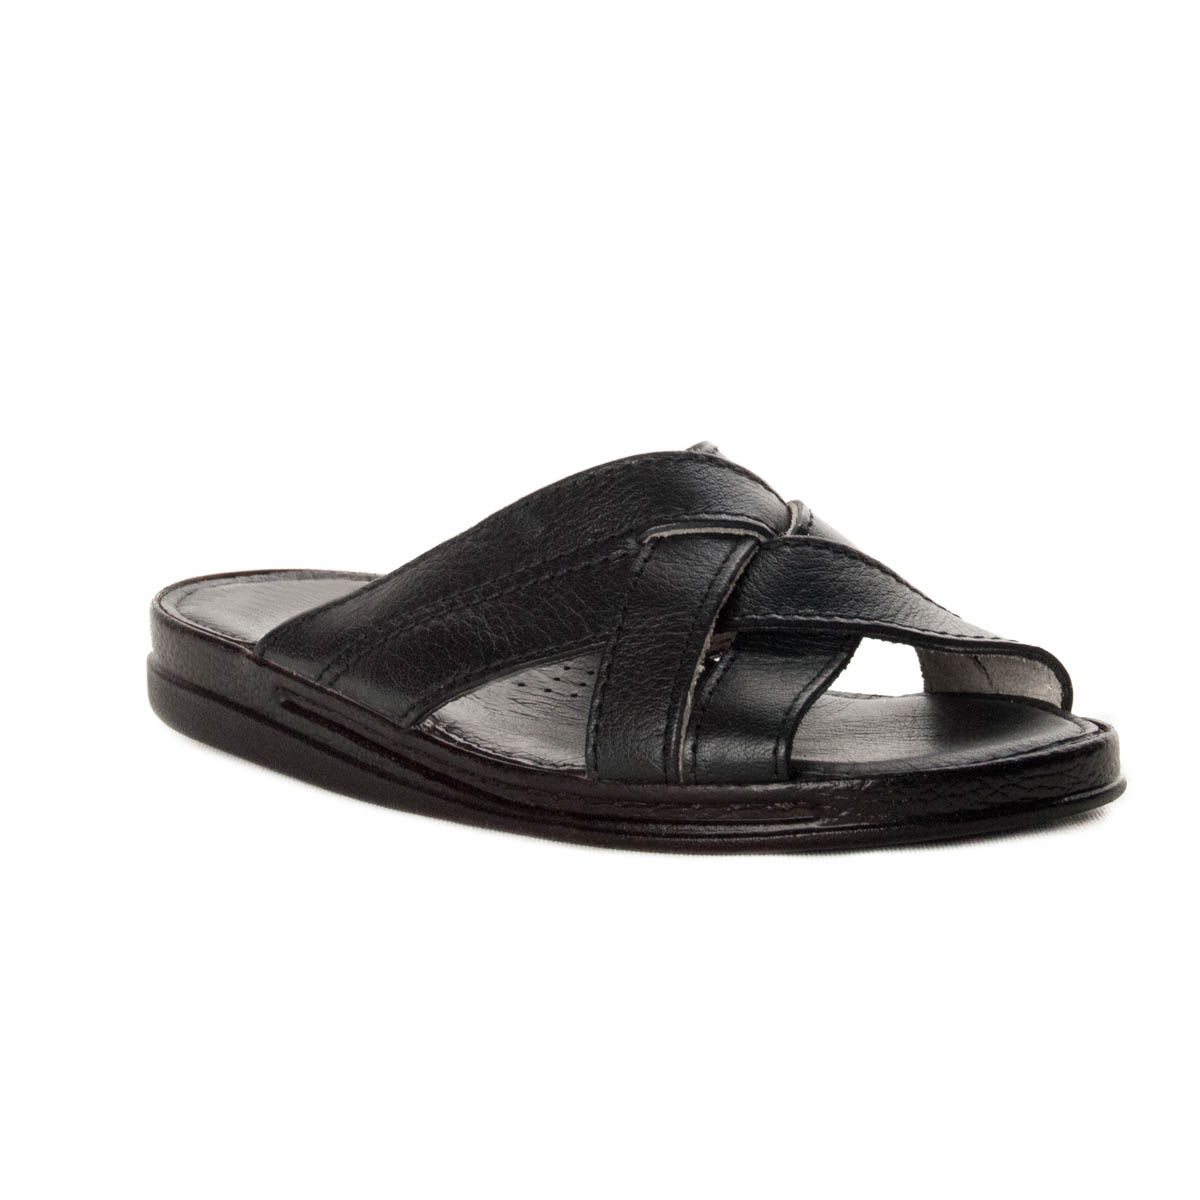 Men's skin sandal, with maximum comfort on the floor, by its gel, soft and padded template. Anatomical It consists of several crossed strips in the front. Very summer for his style. Made in Spain,